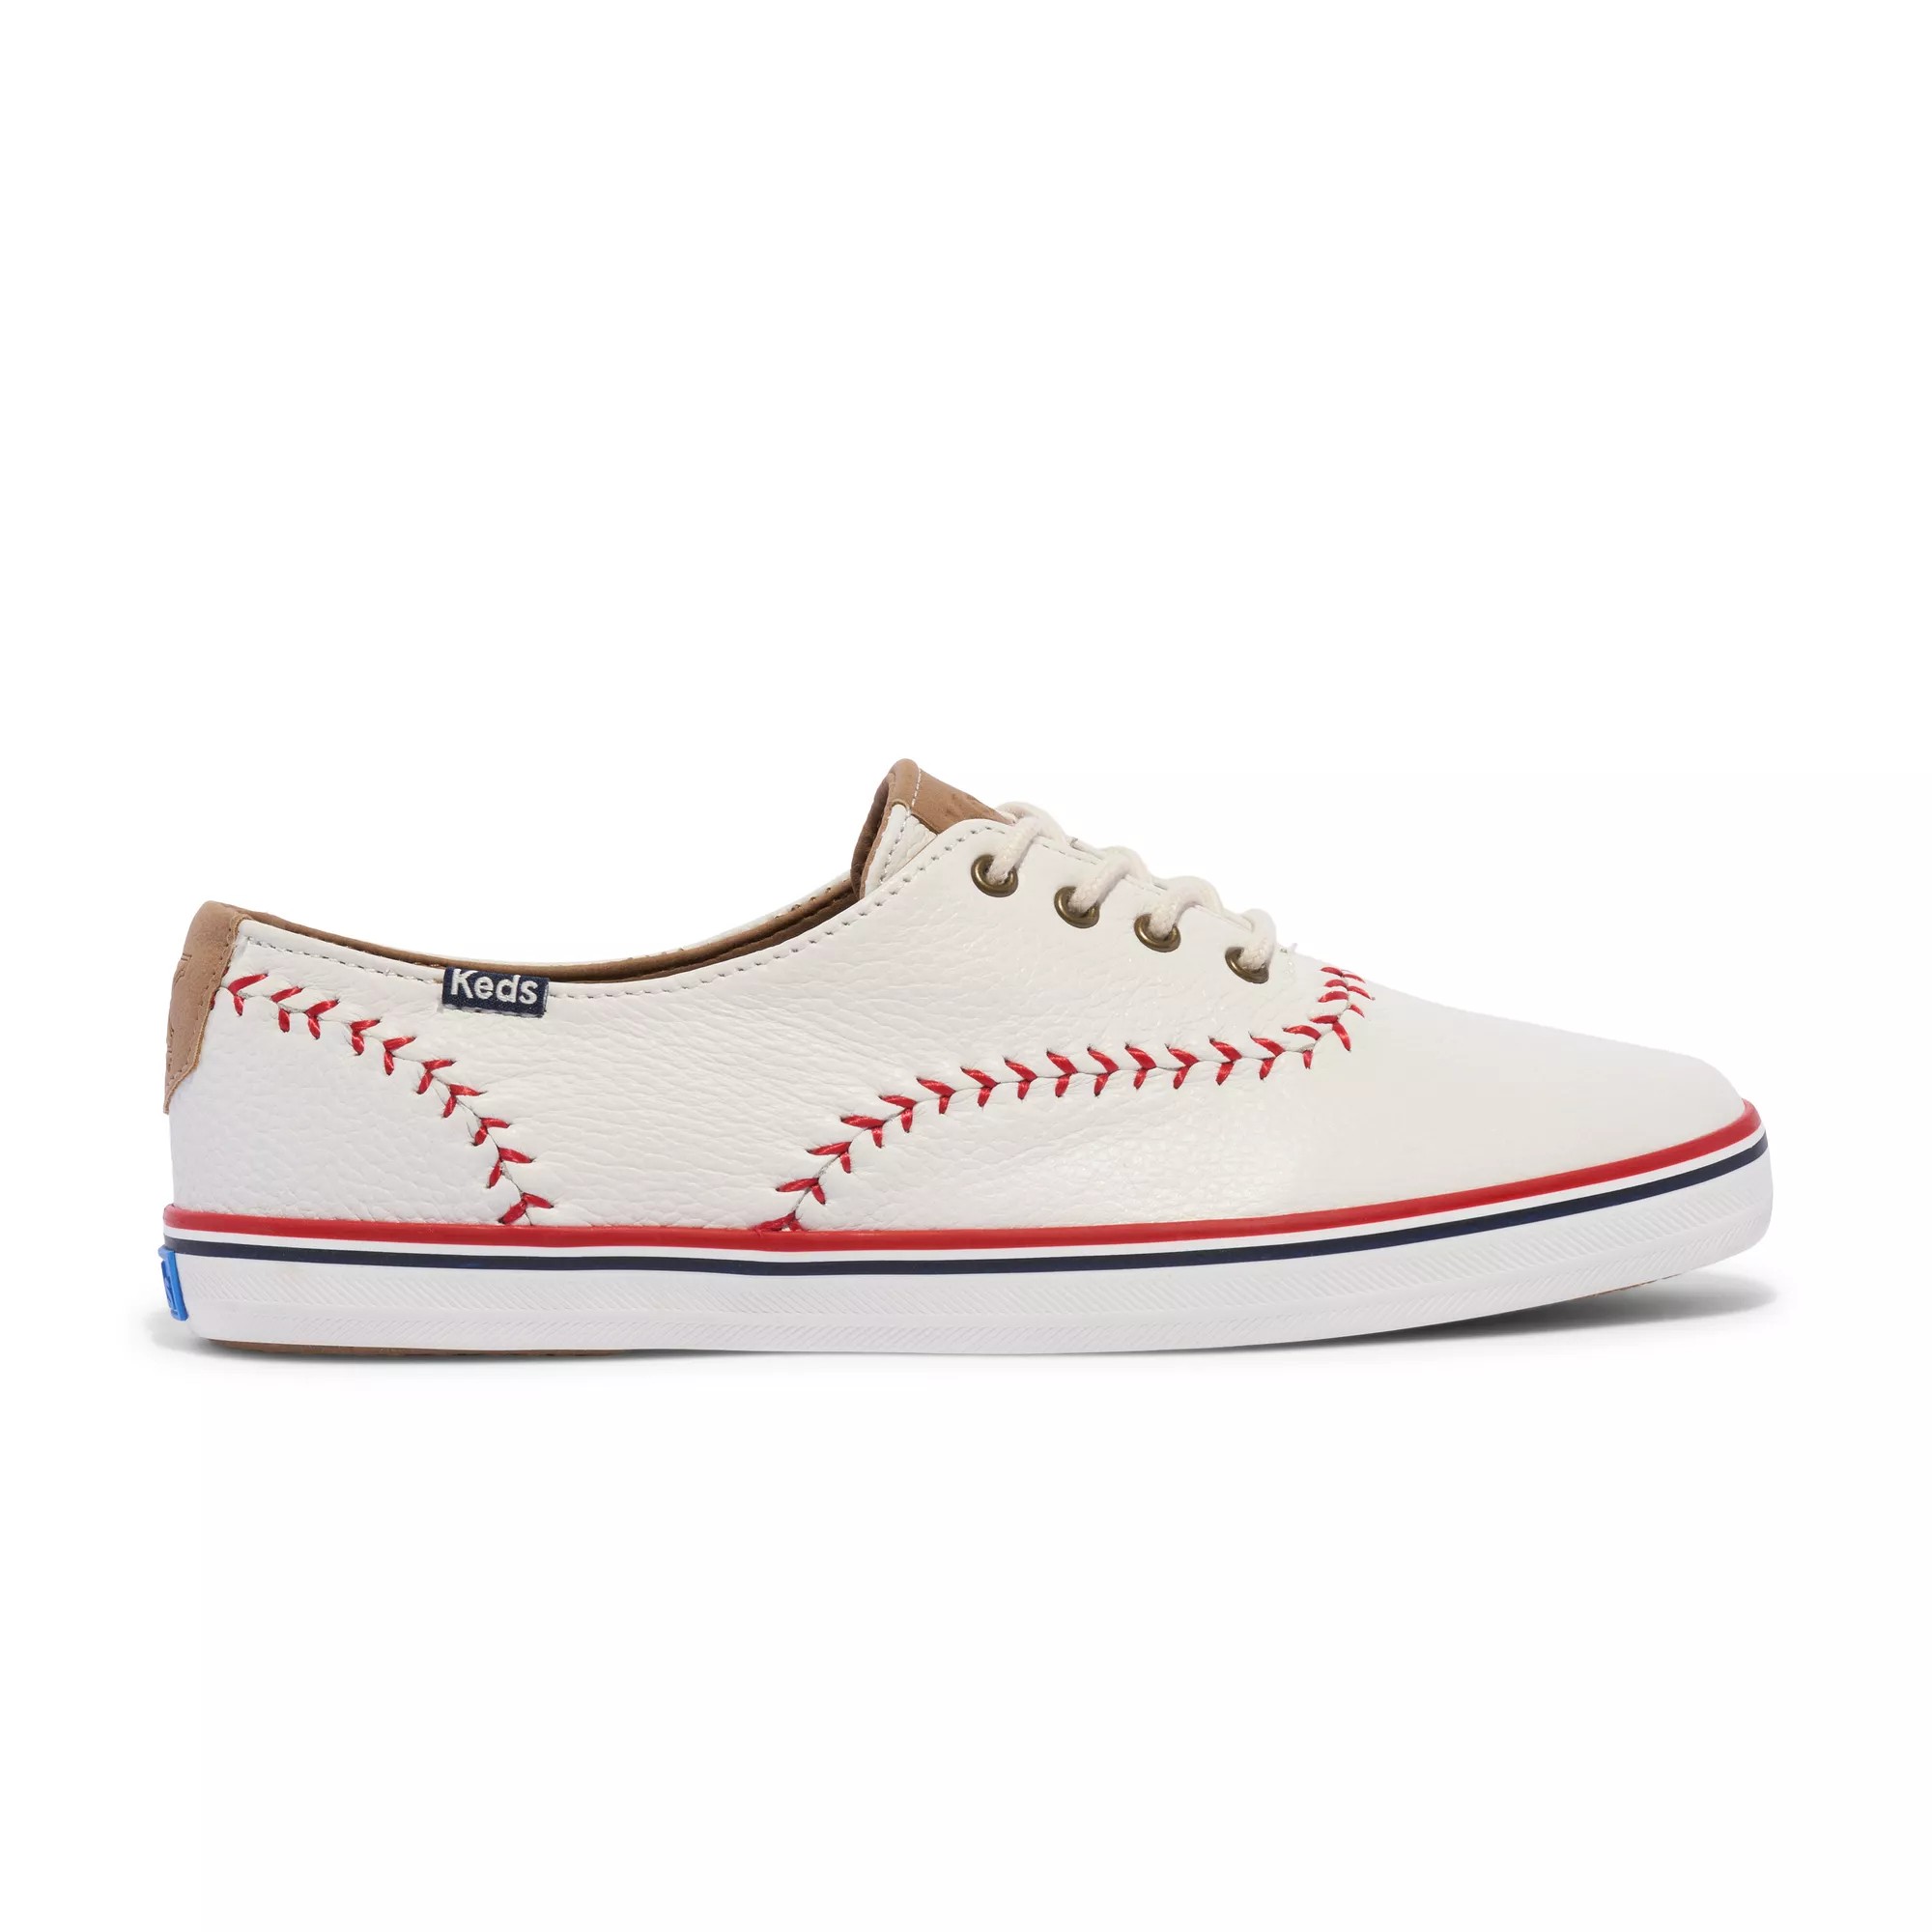 Keds Champion Pennant Leather Lace Up - Free Shipping | KEDS